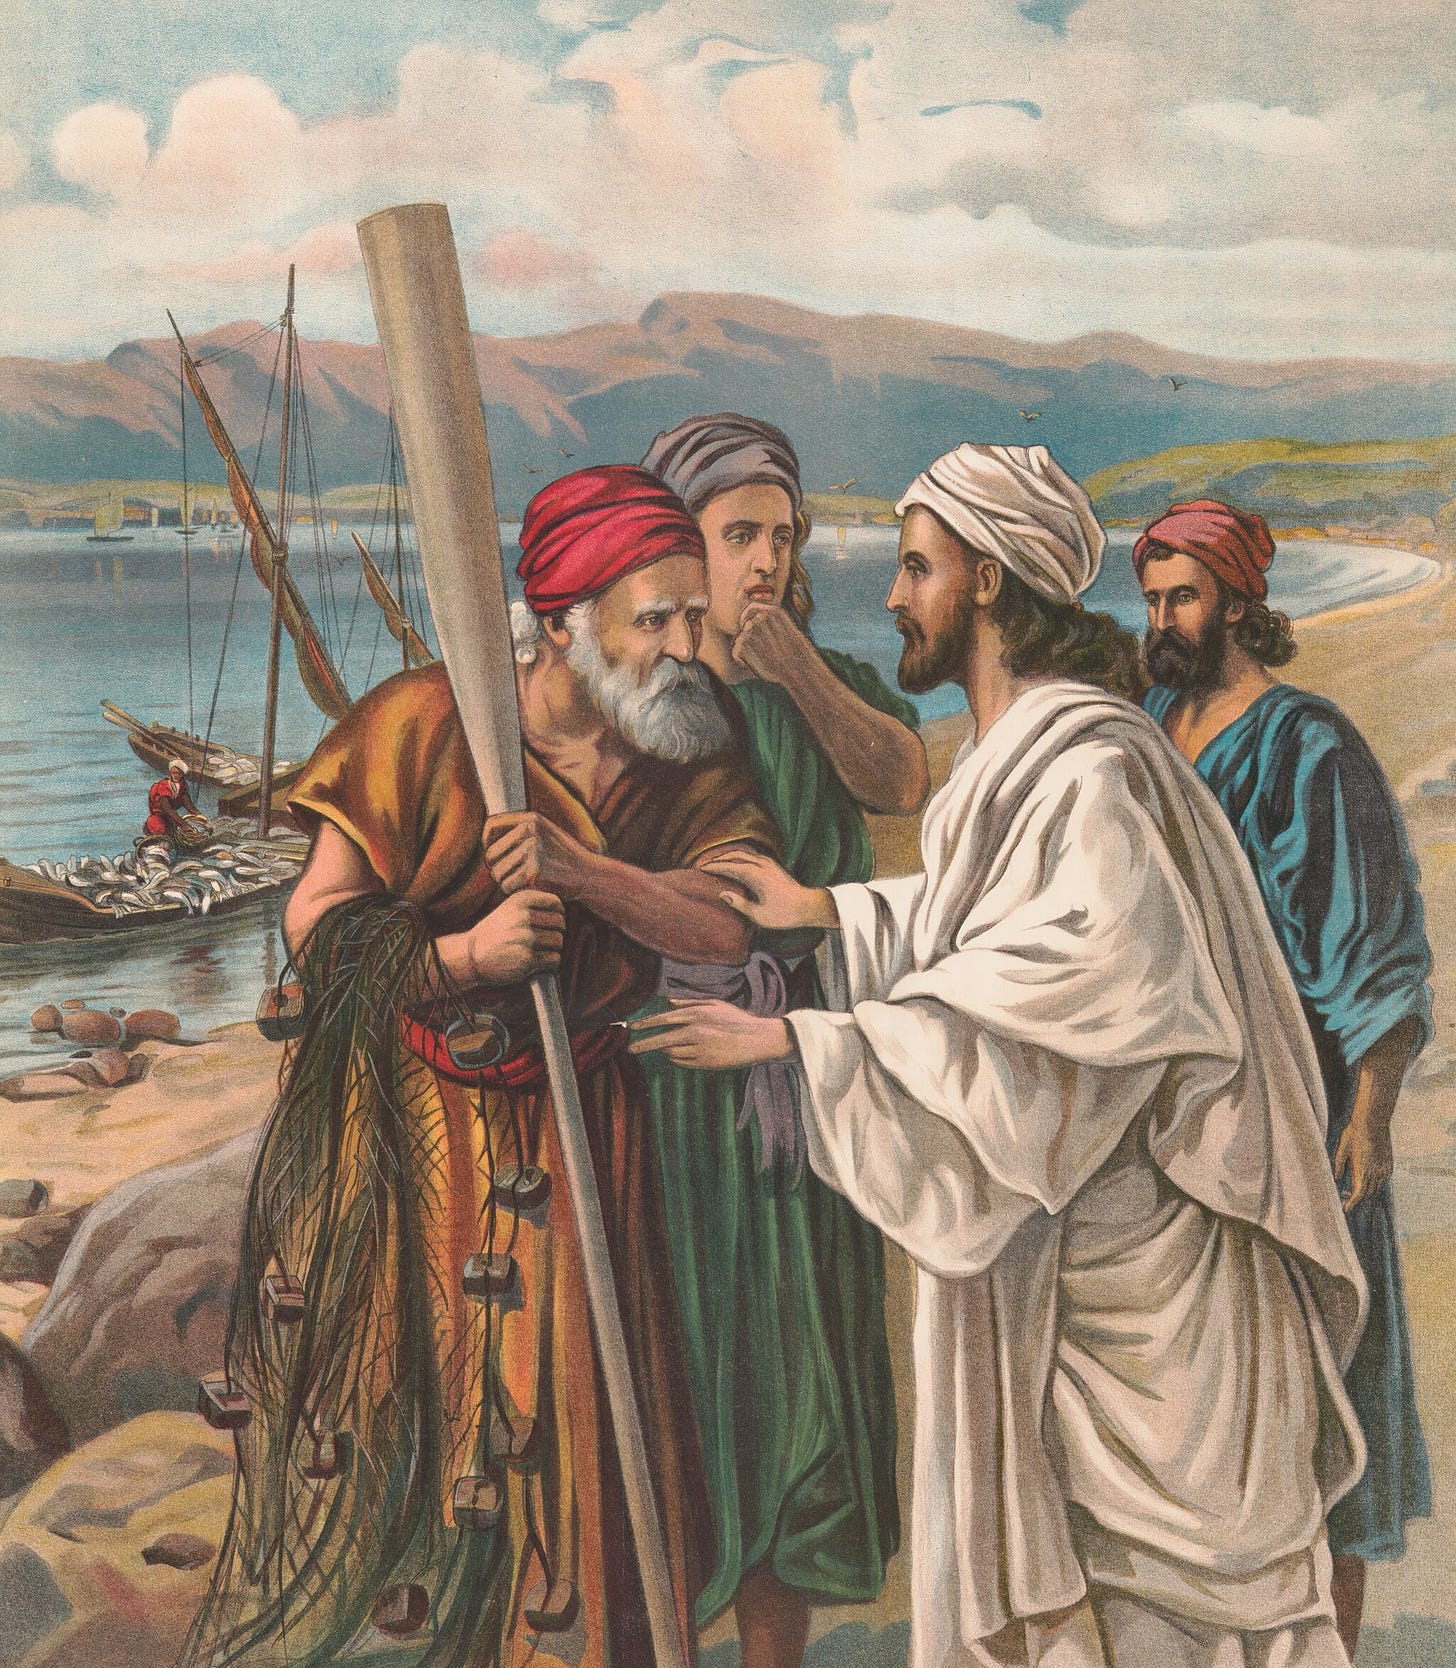 Jesus calling fishermen (1905) by Providence Lith. Co (American, 1880-1975)